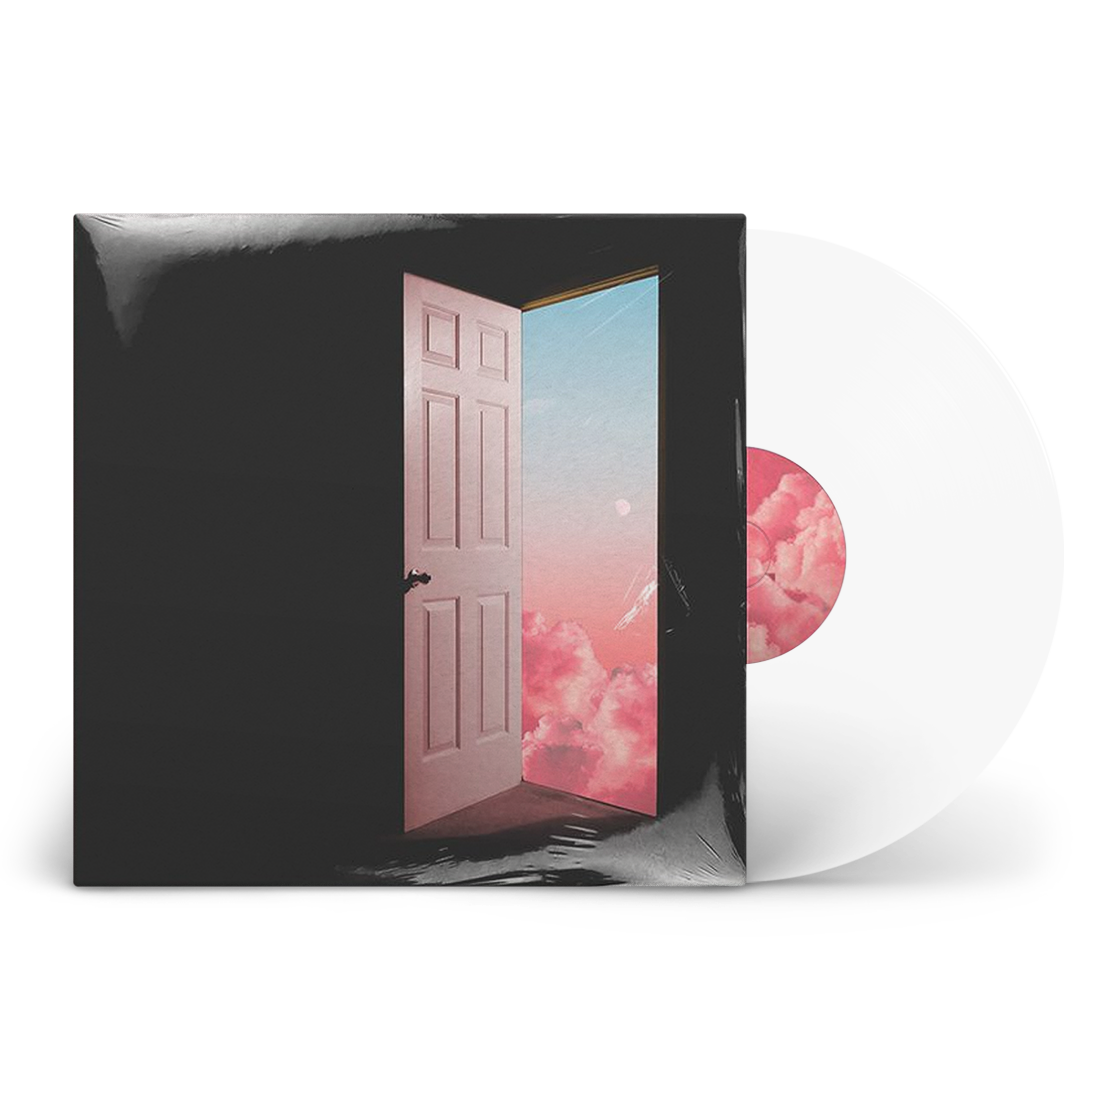 Something To Leave The House For: Signed Cloud White Vinyl LP